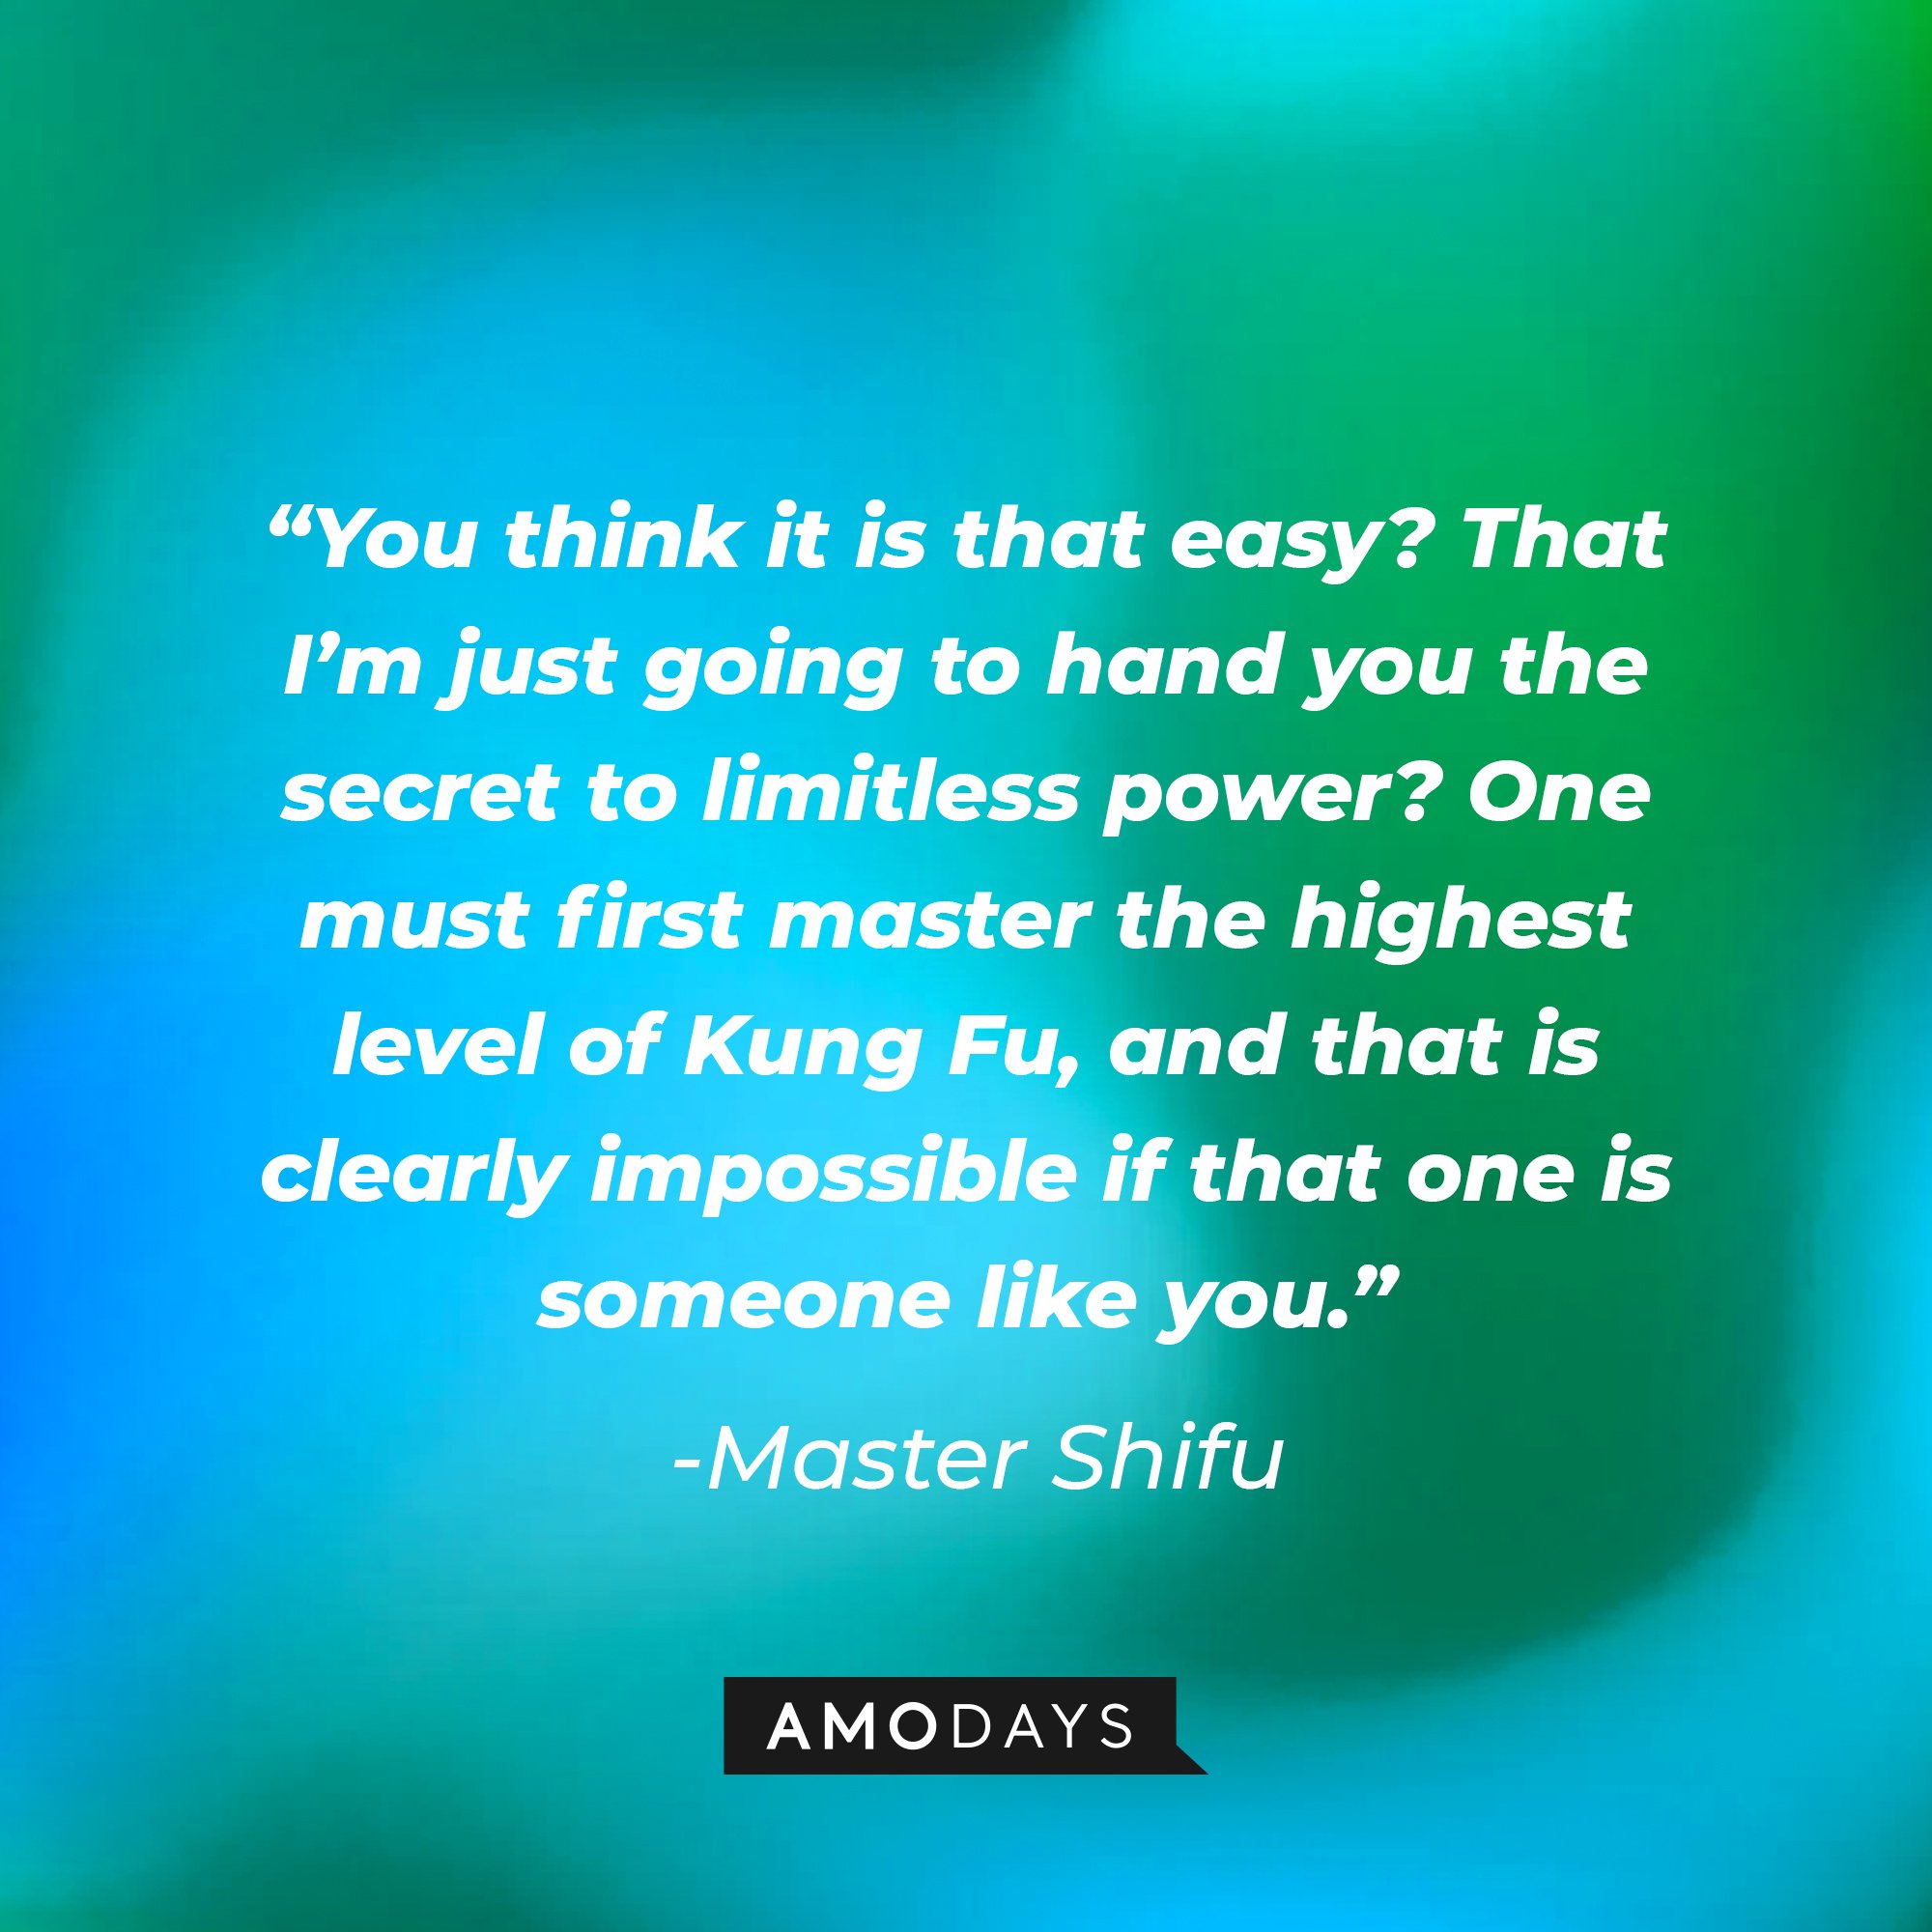 Master Shifu's quote: “You think it is that easy? That I’m just going to hand you the secret to limitless power? One must first master the highest level of Kung Fu, and that is clearly impossible if that one is someone like you.” | Image: AmoDays